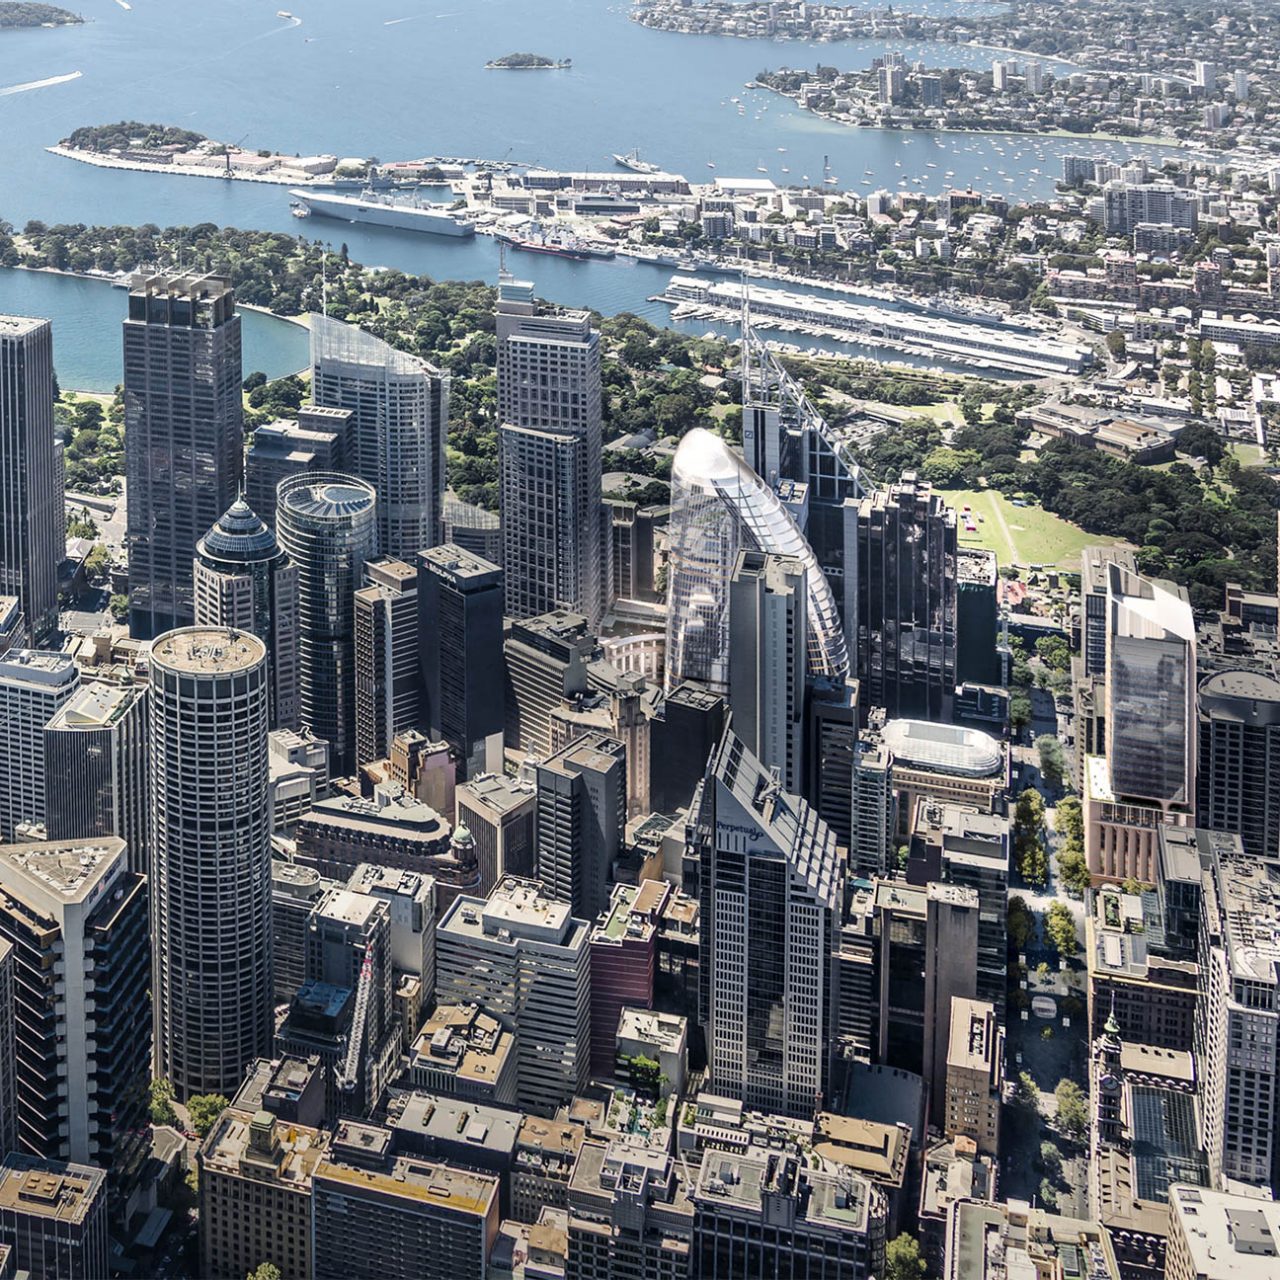 Artist's impression Martin Place precinct within Sydney skyline, showing placement of towers in relation to neighbouring buildings and landmarks